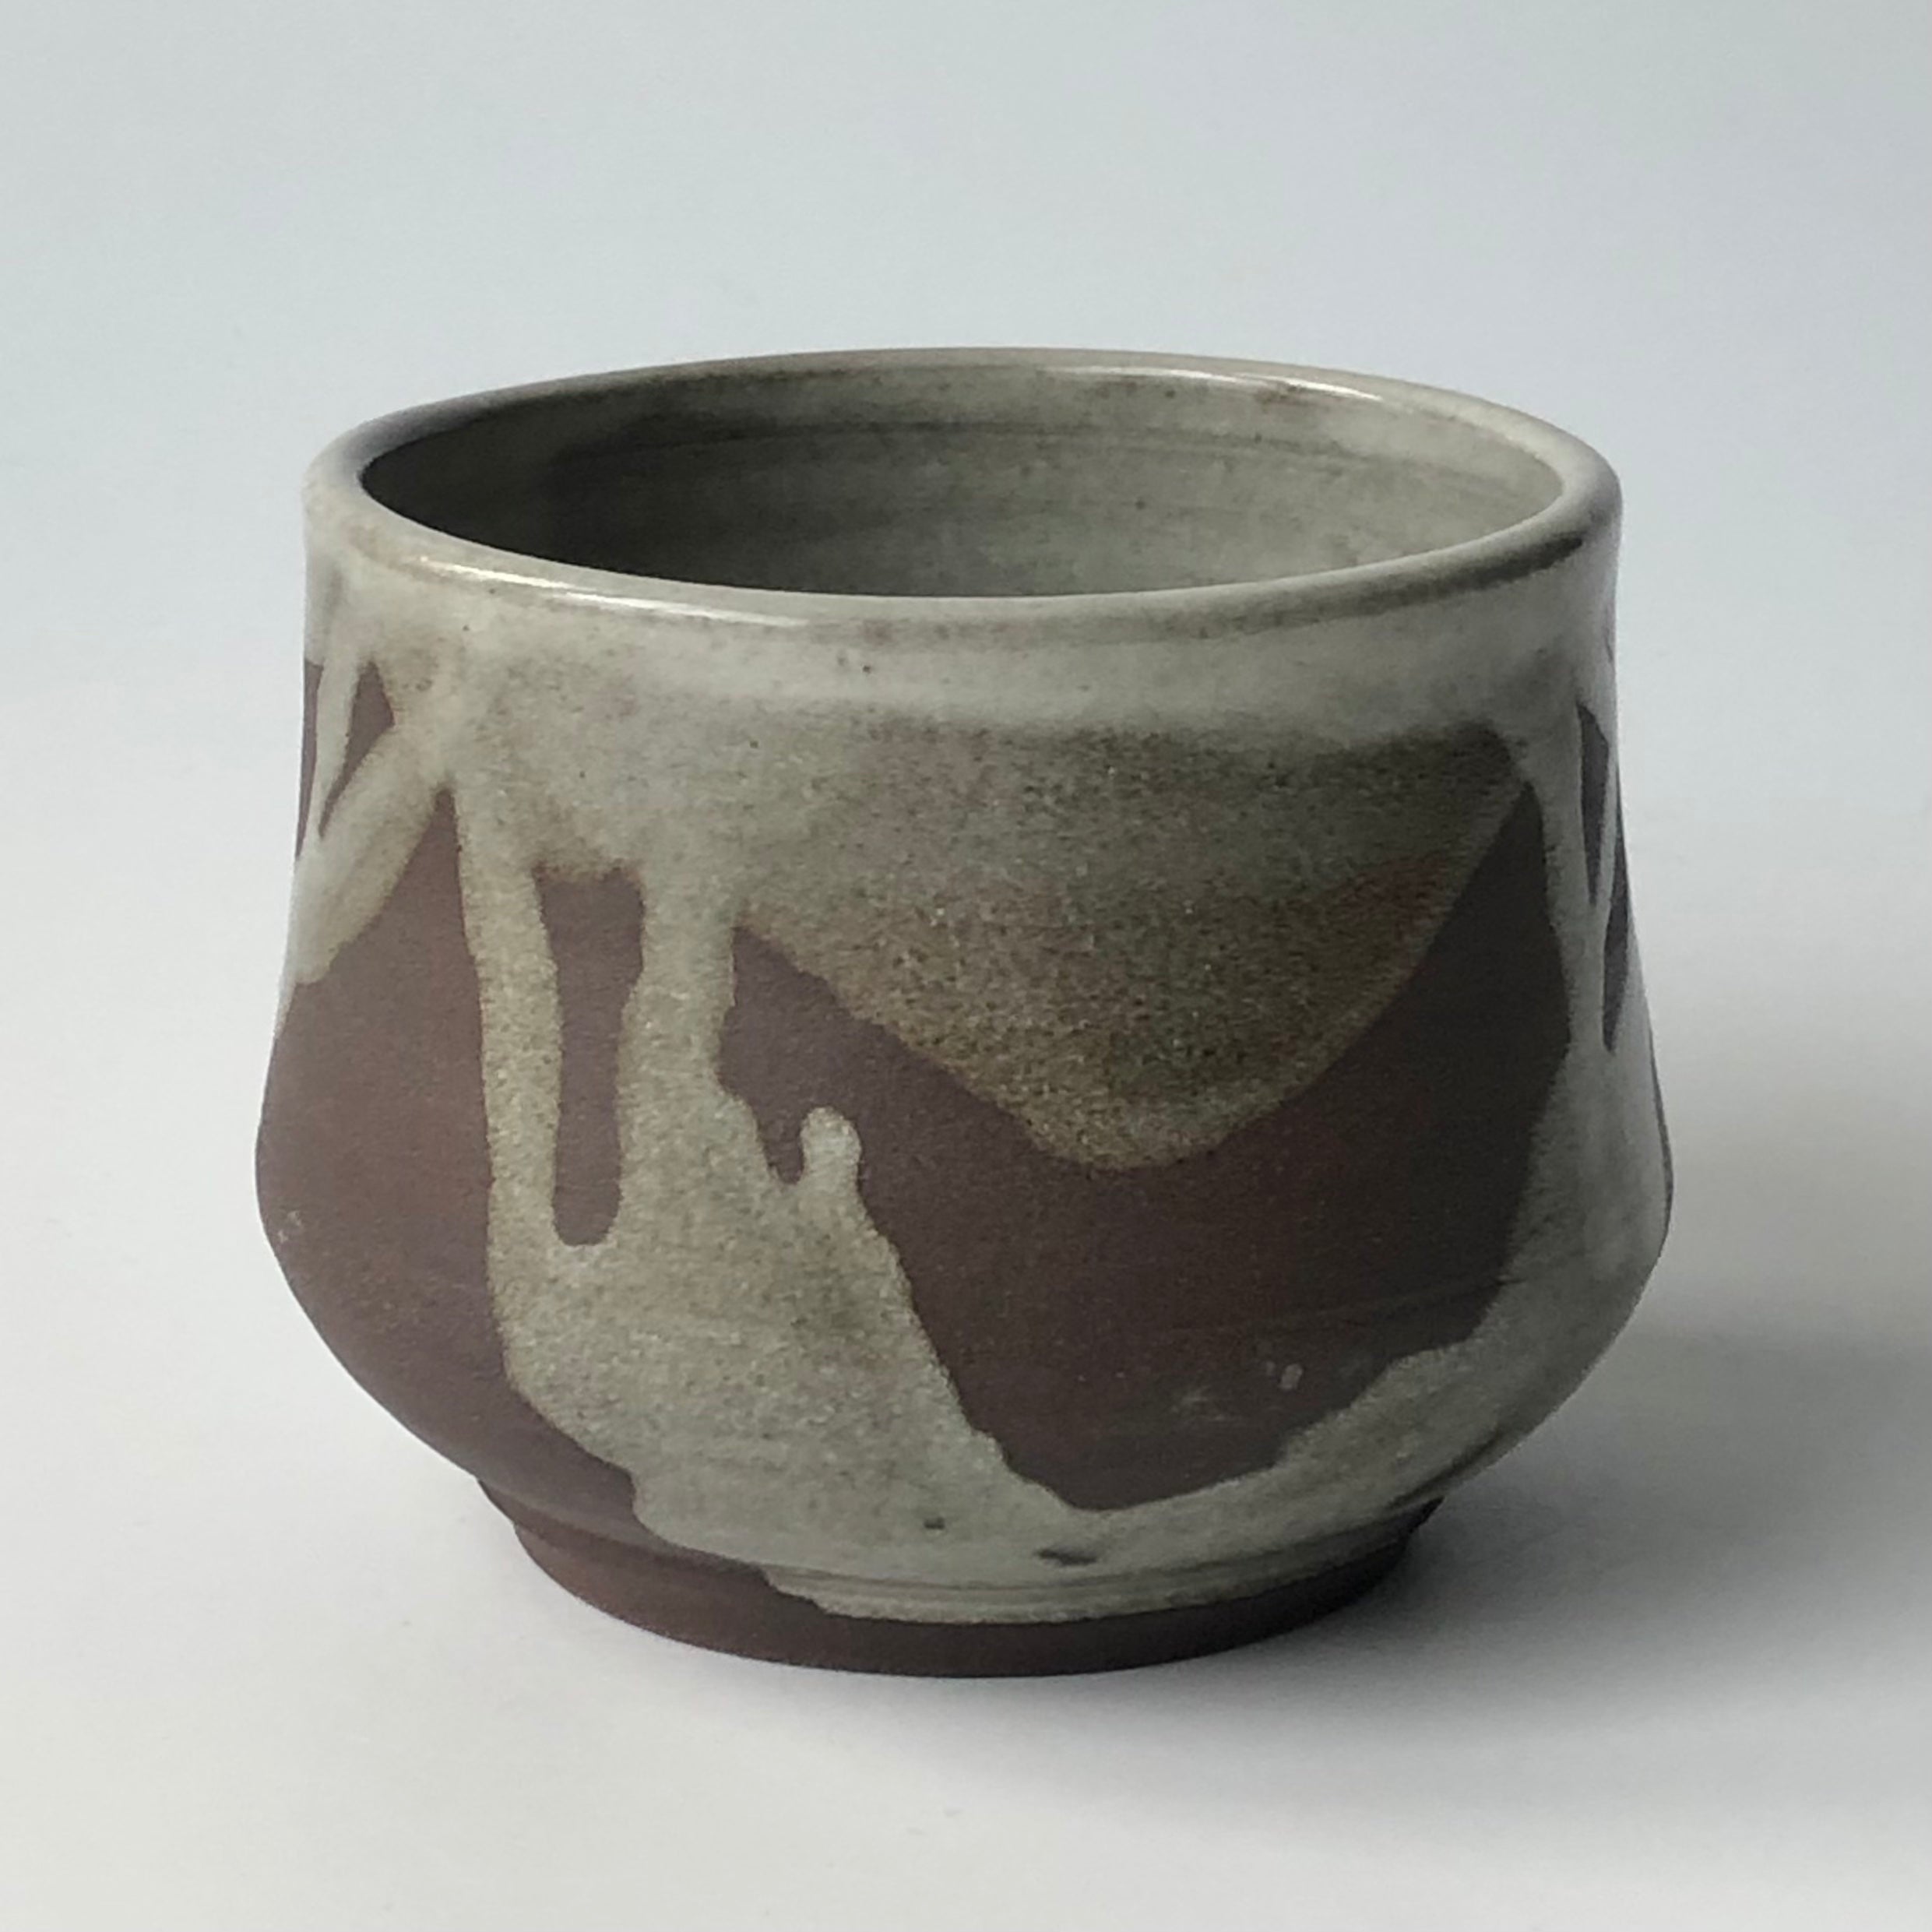 Black Clay Chawan (Teabowl) Splashed with Apple Orchard Ash Glaze